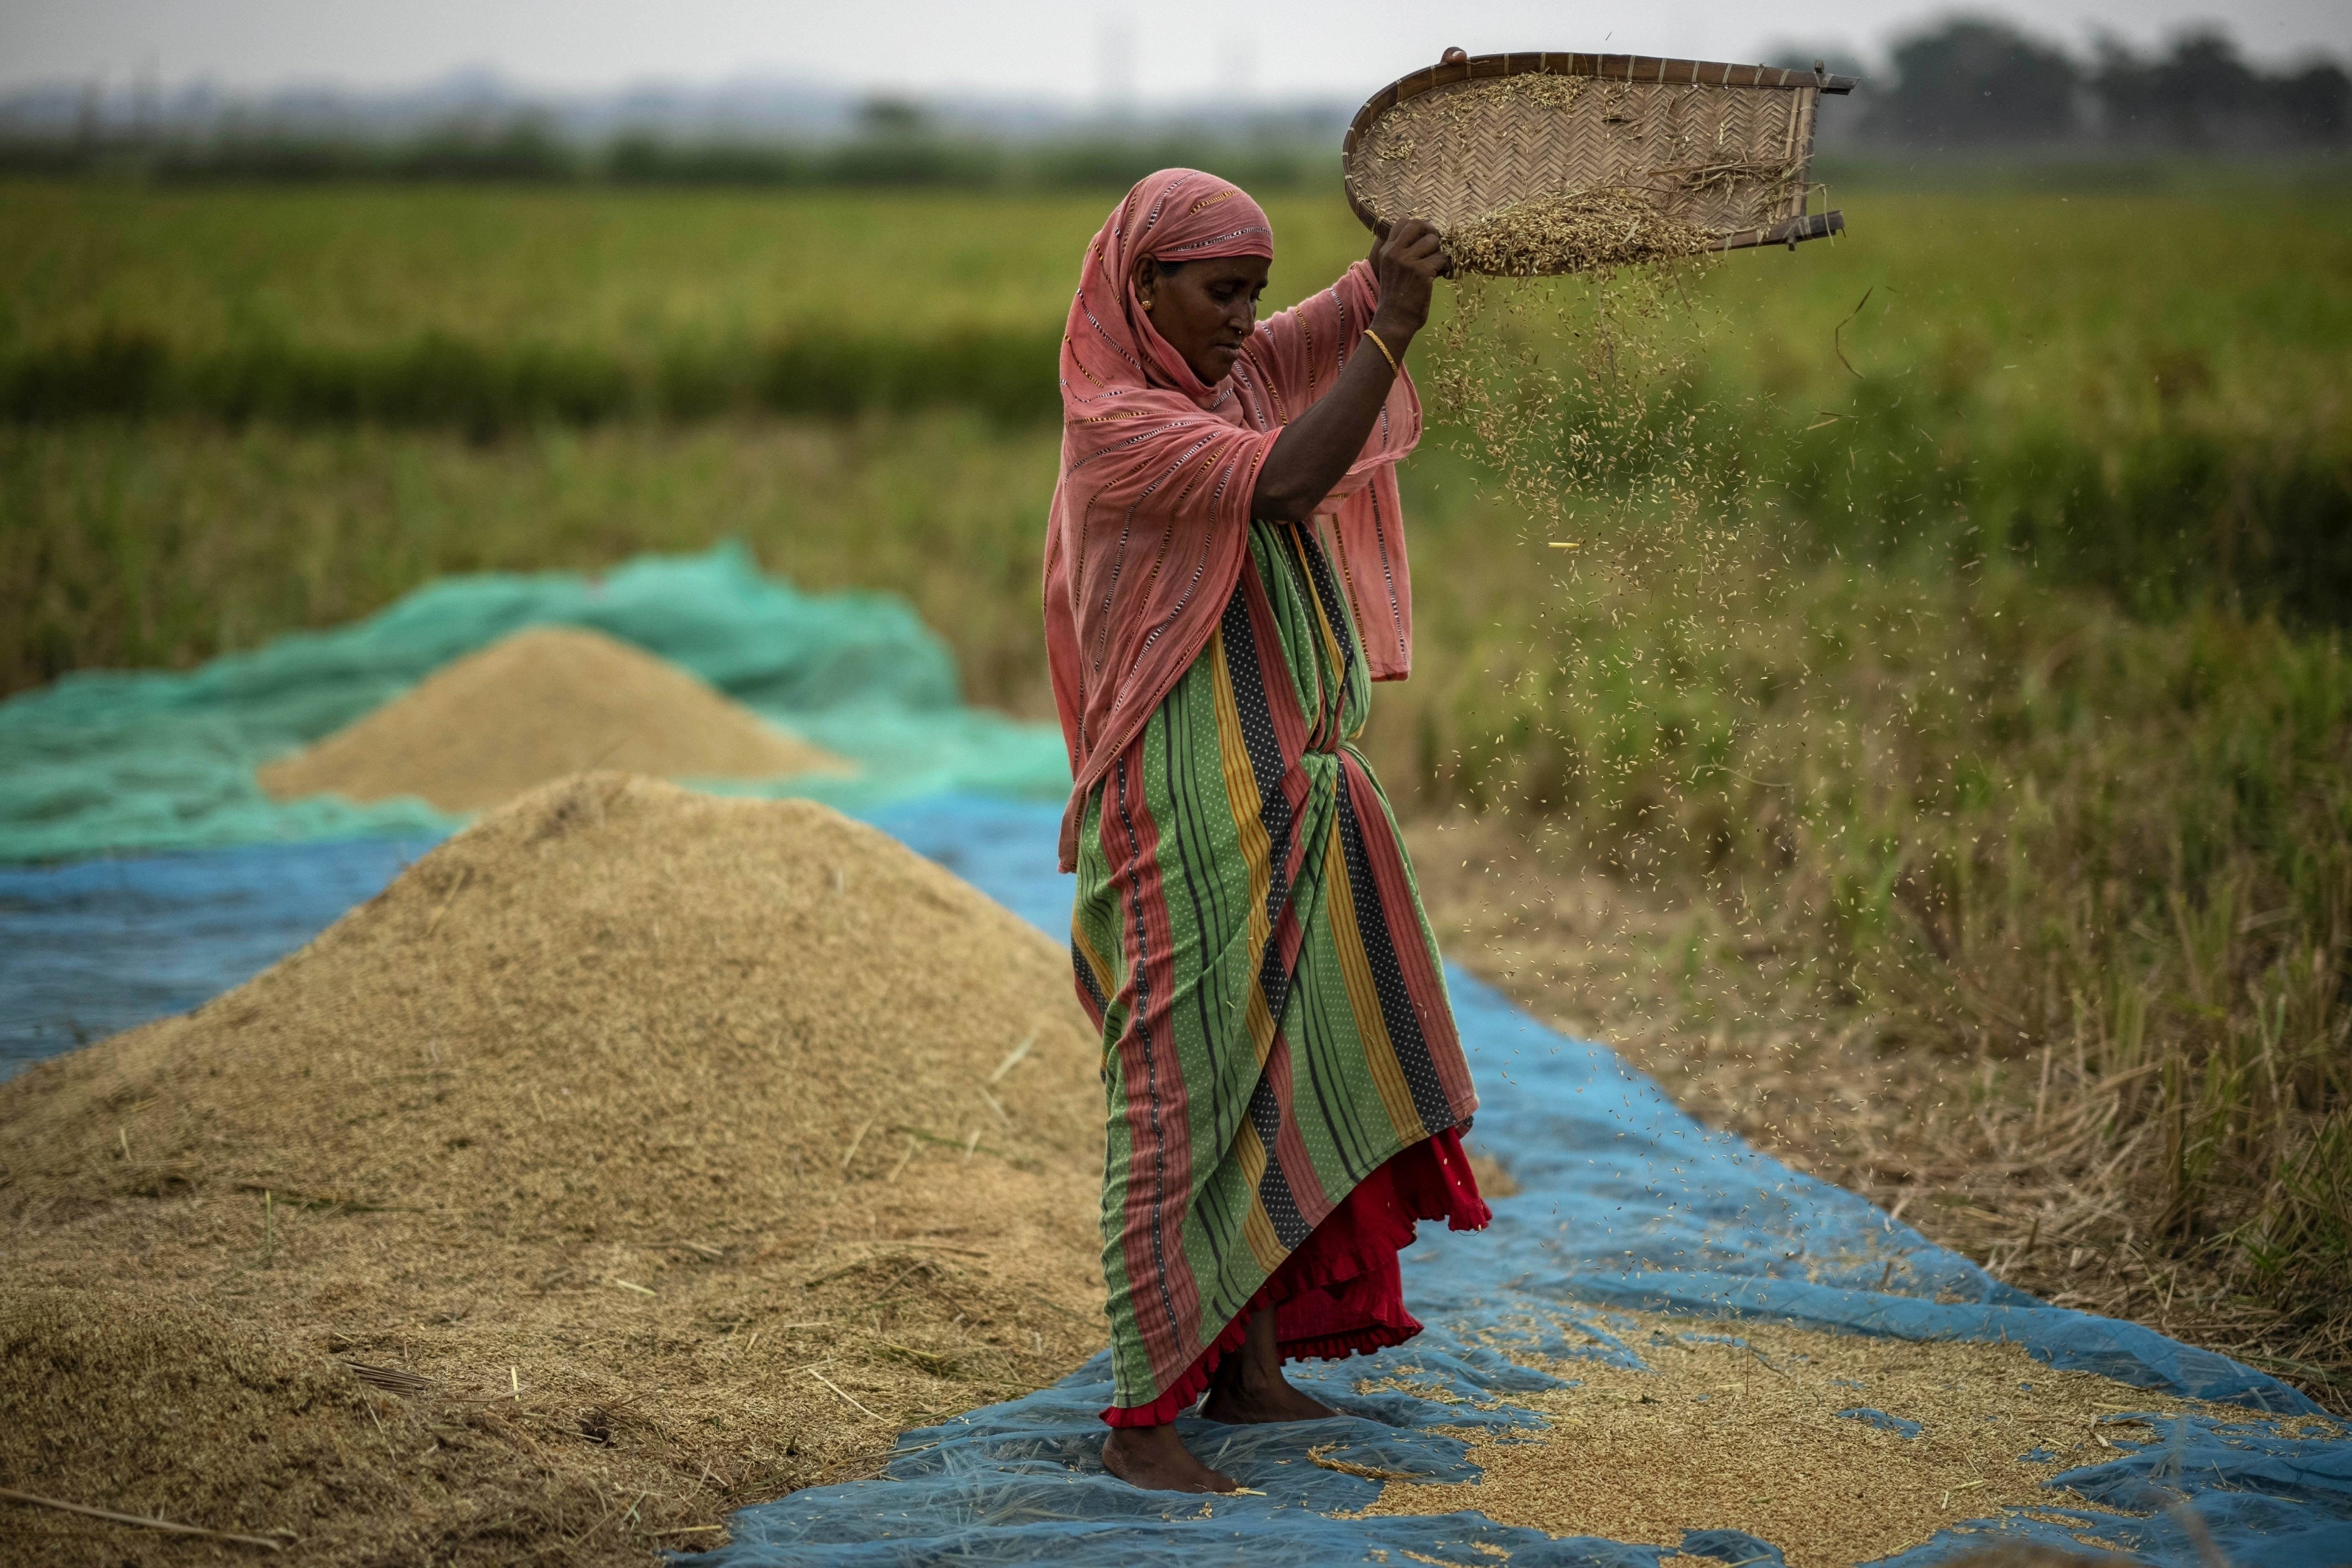 A farmer sorts rice while working in a paddy field on the outskirts of Guwahati, India earlier this summer. Photo: AP